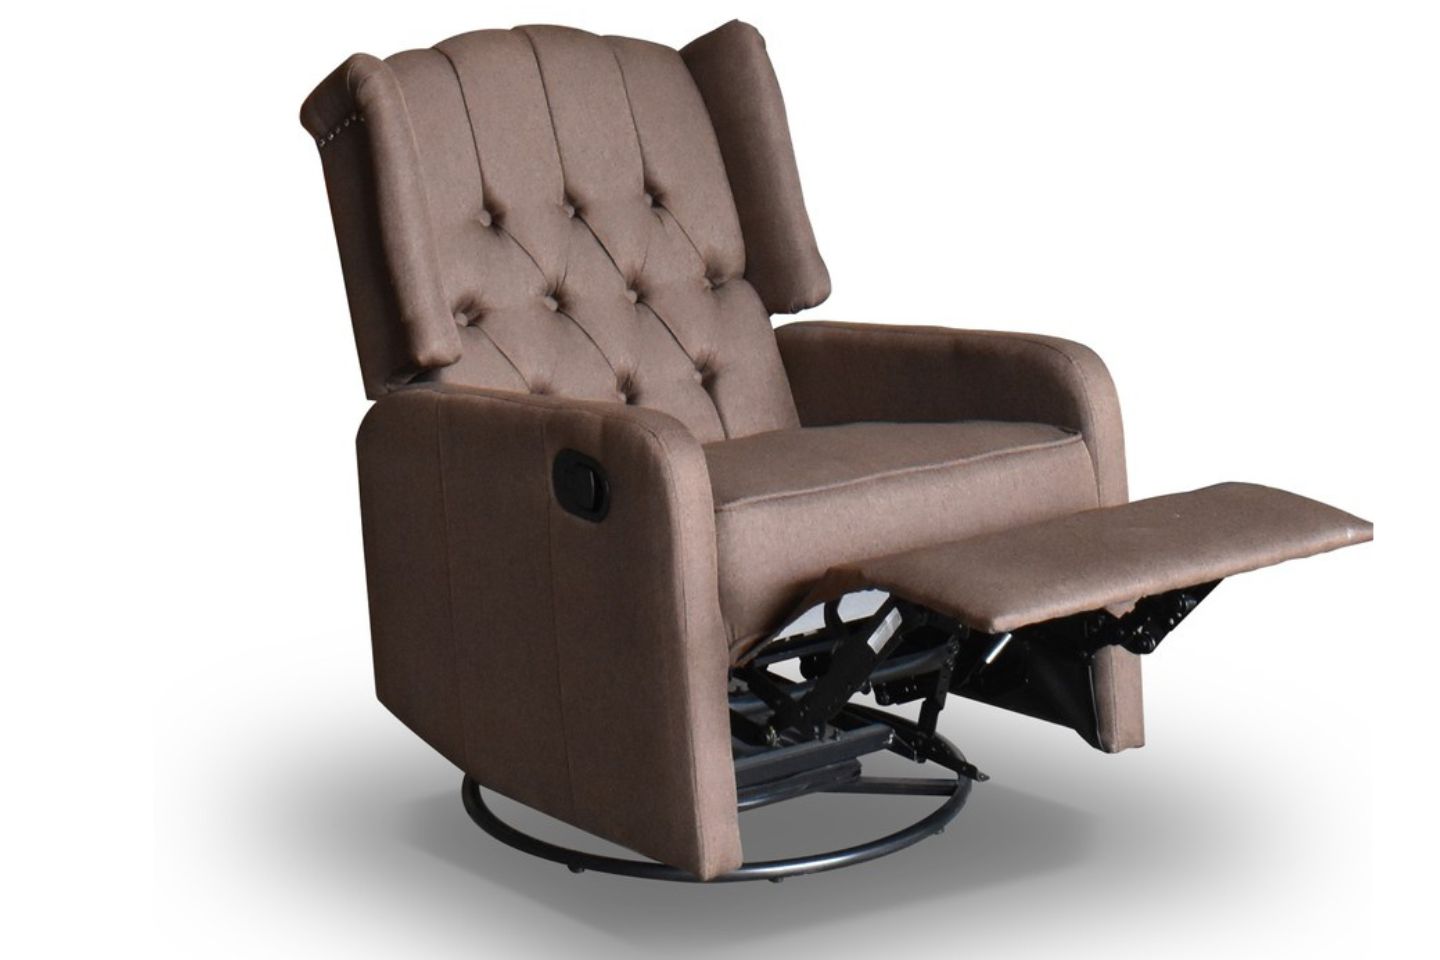 Best Recliners for Recovering From Knee Surgery